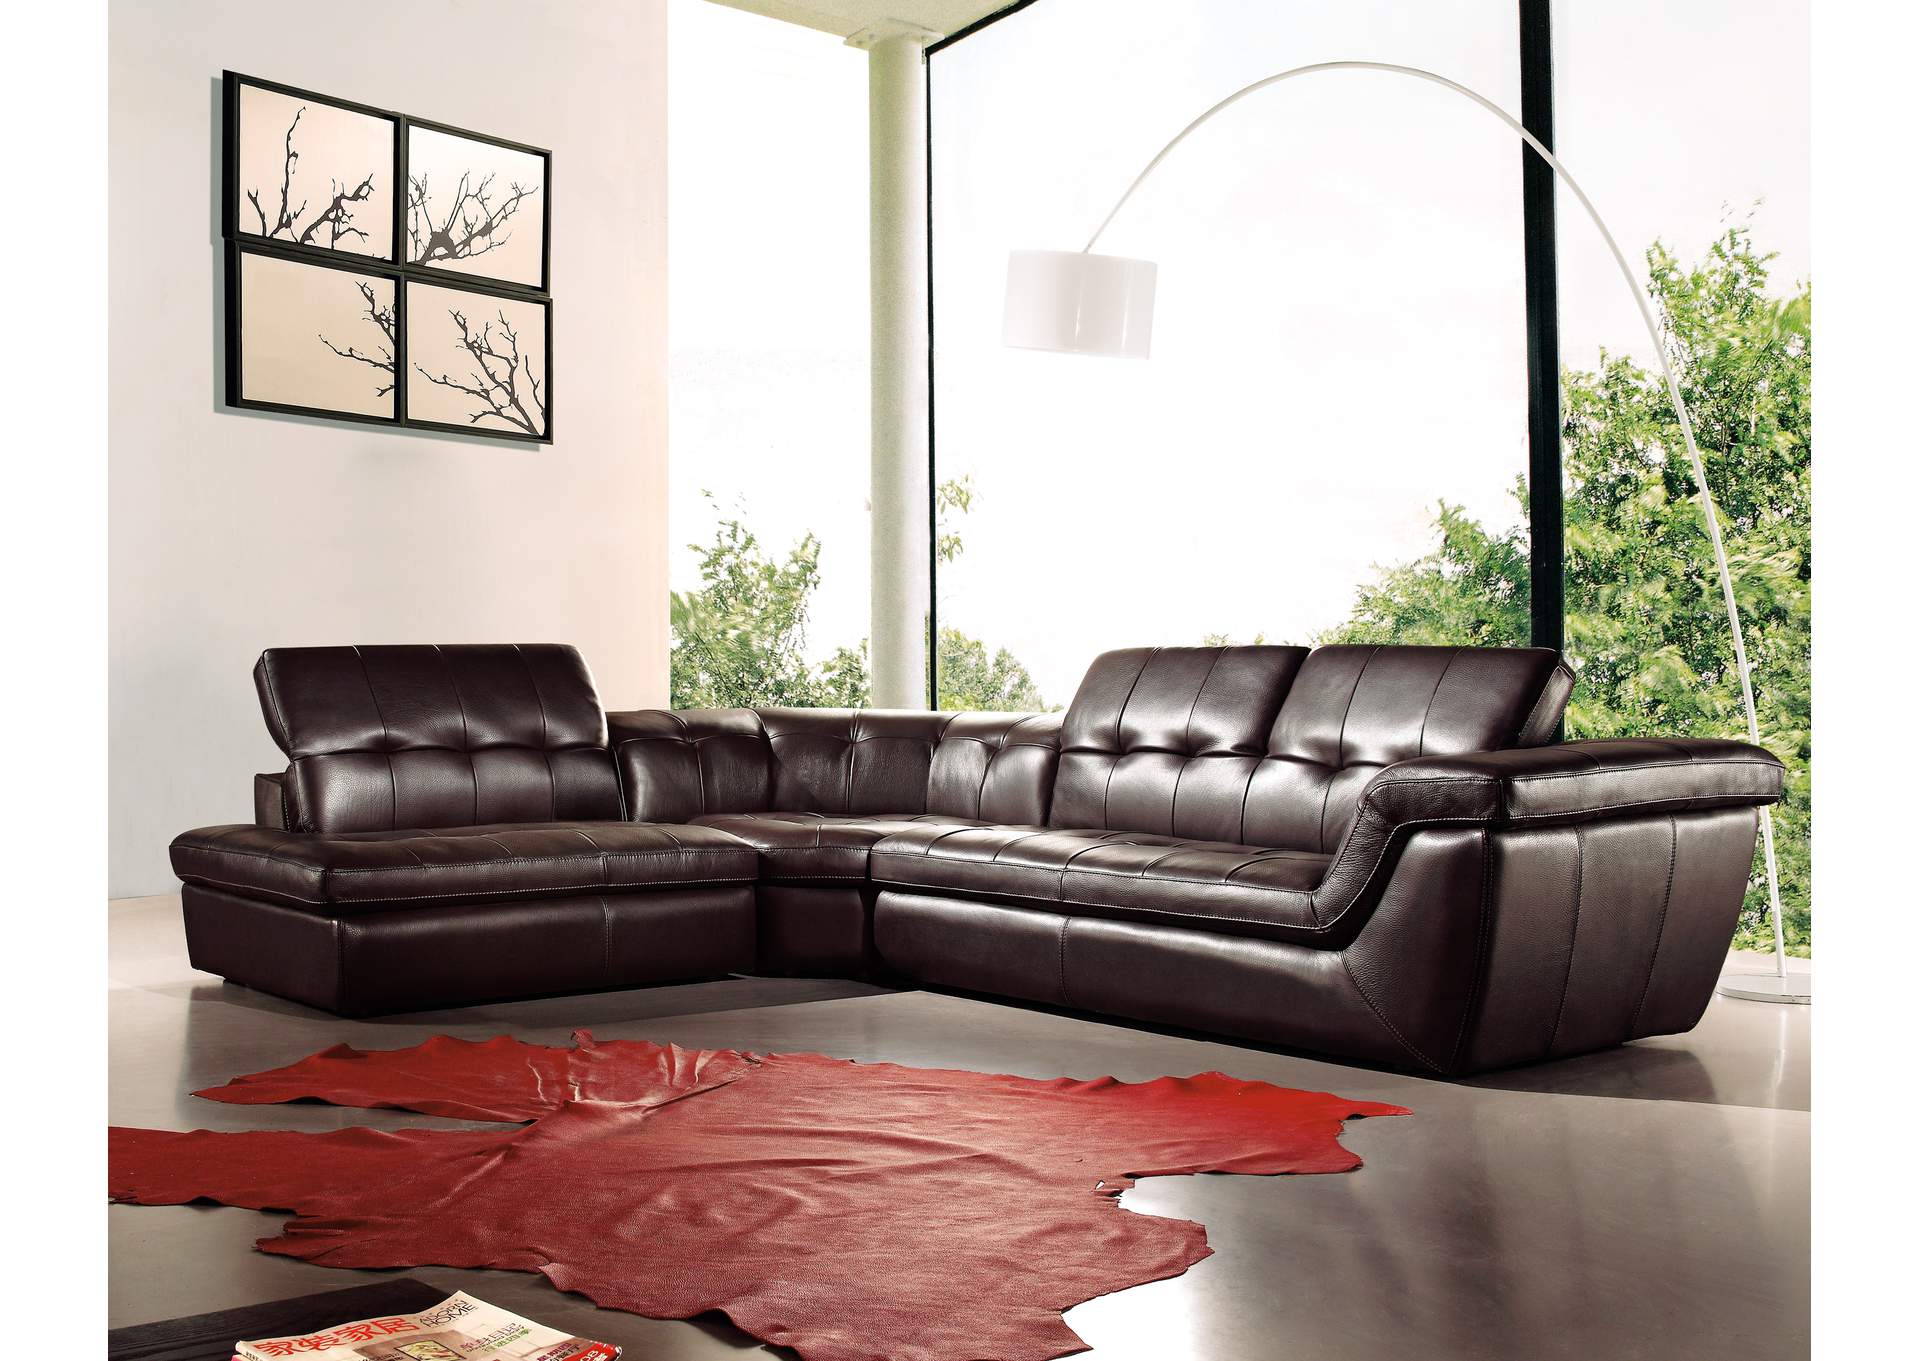 397 Italian Leather Sectional Chocolate Color in Left Hand Facing,J&M Furniture